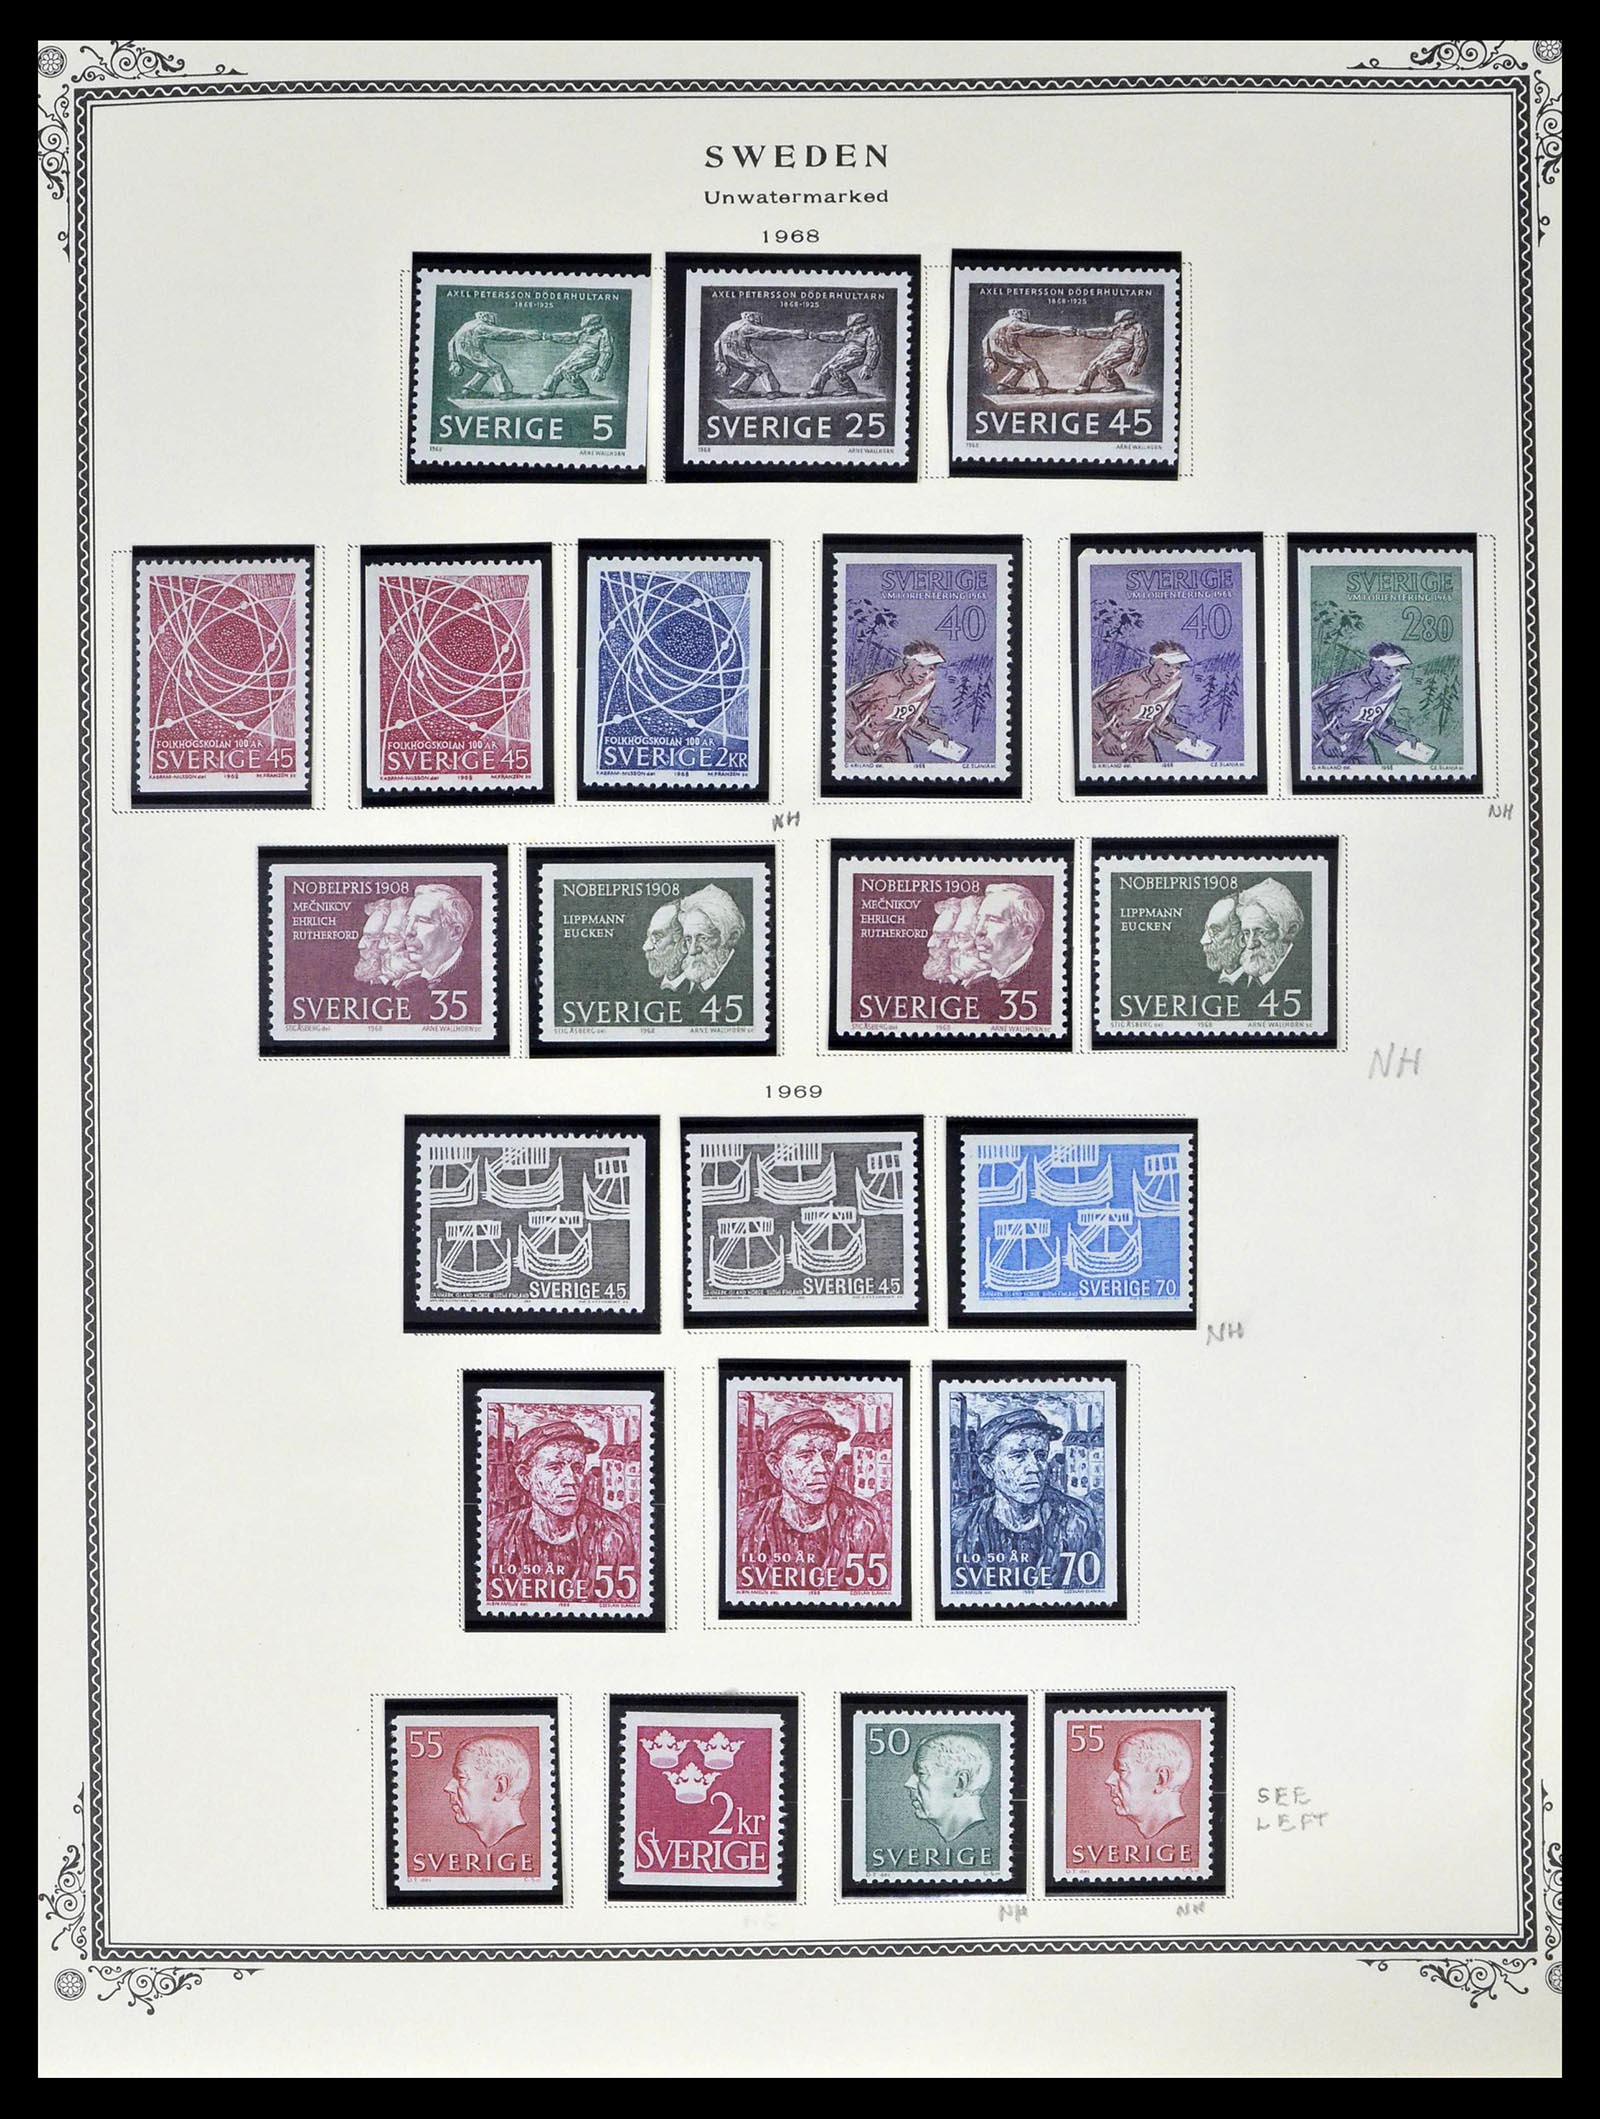 39179 0075 - Stamp collection 39179 Sweden 1855-1997.